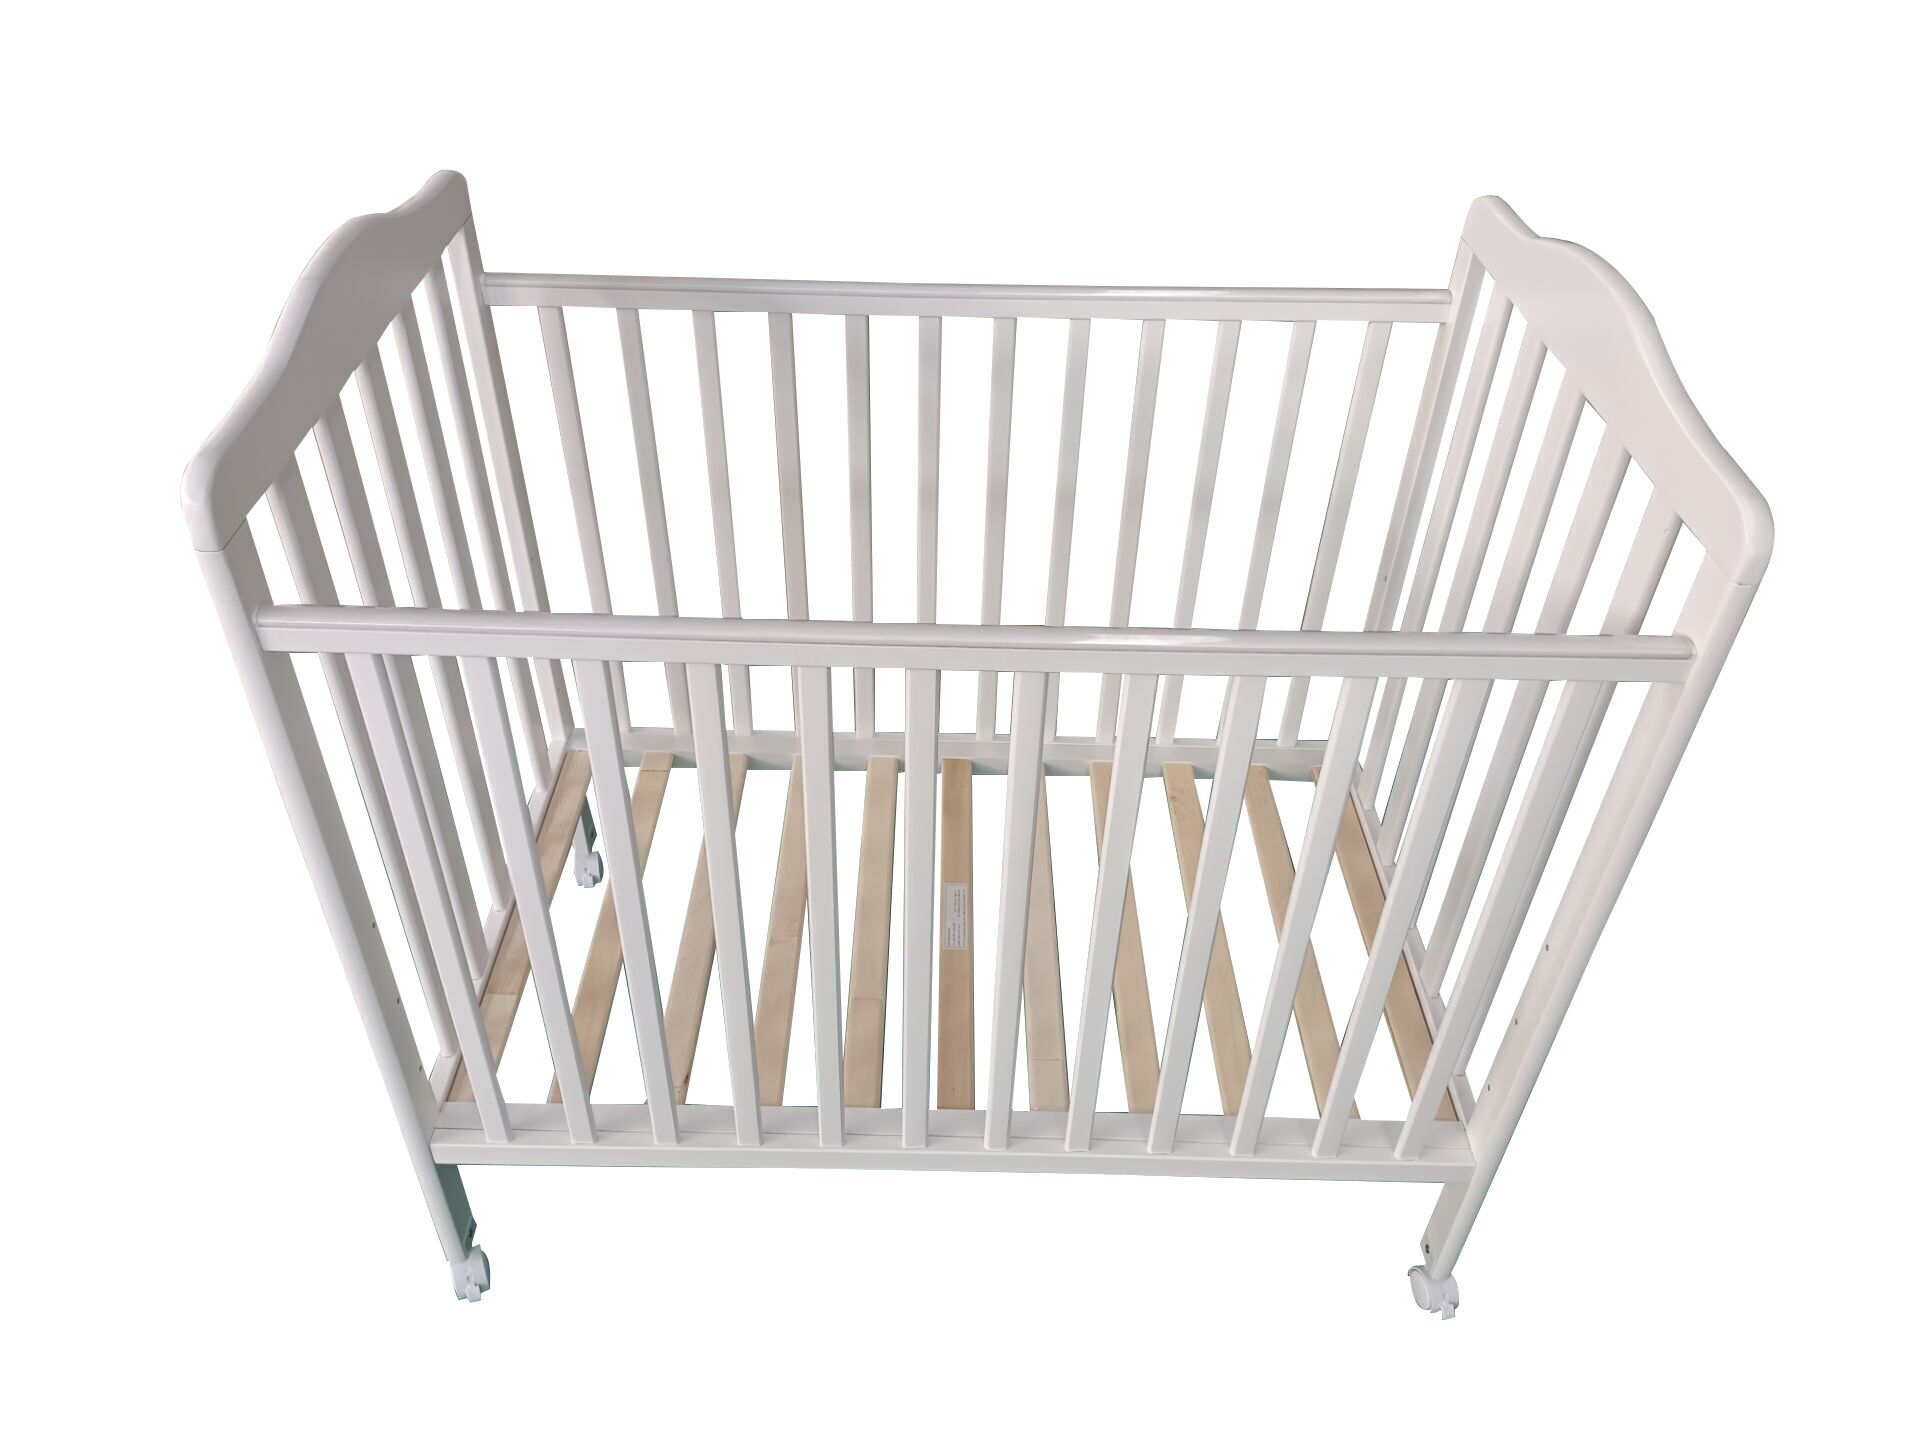 Solid Pine Wooden Baby Cot Design Wooden Baby Crib Factory Manufacturer from China Company,1108-N